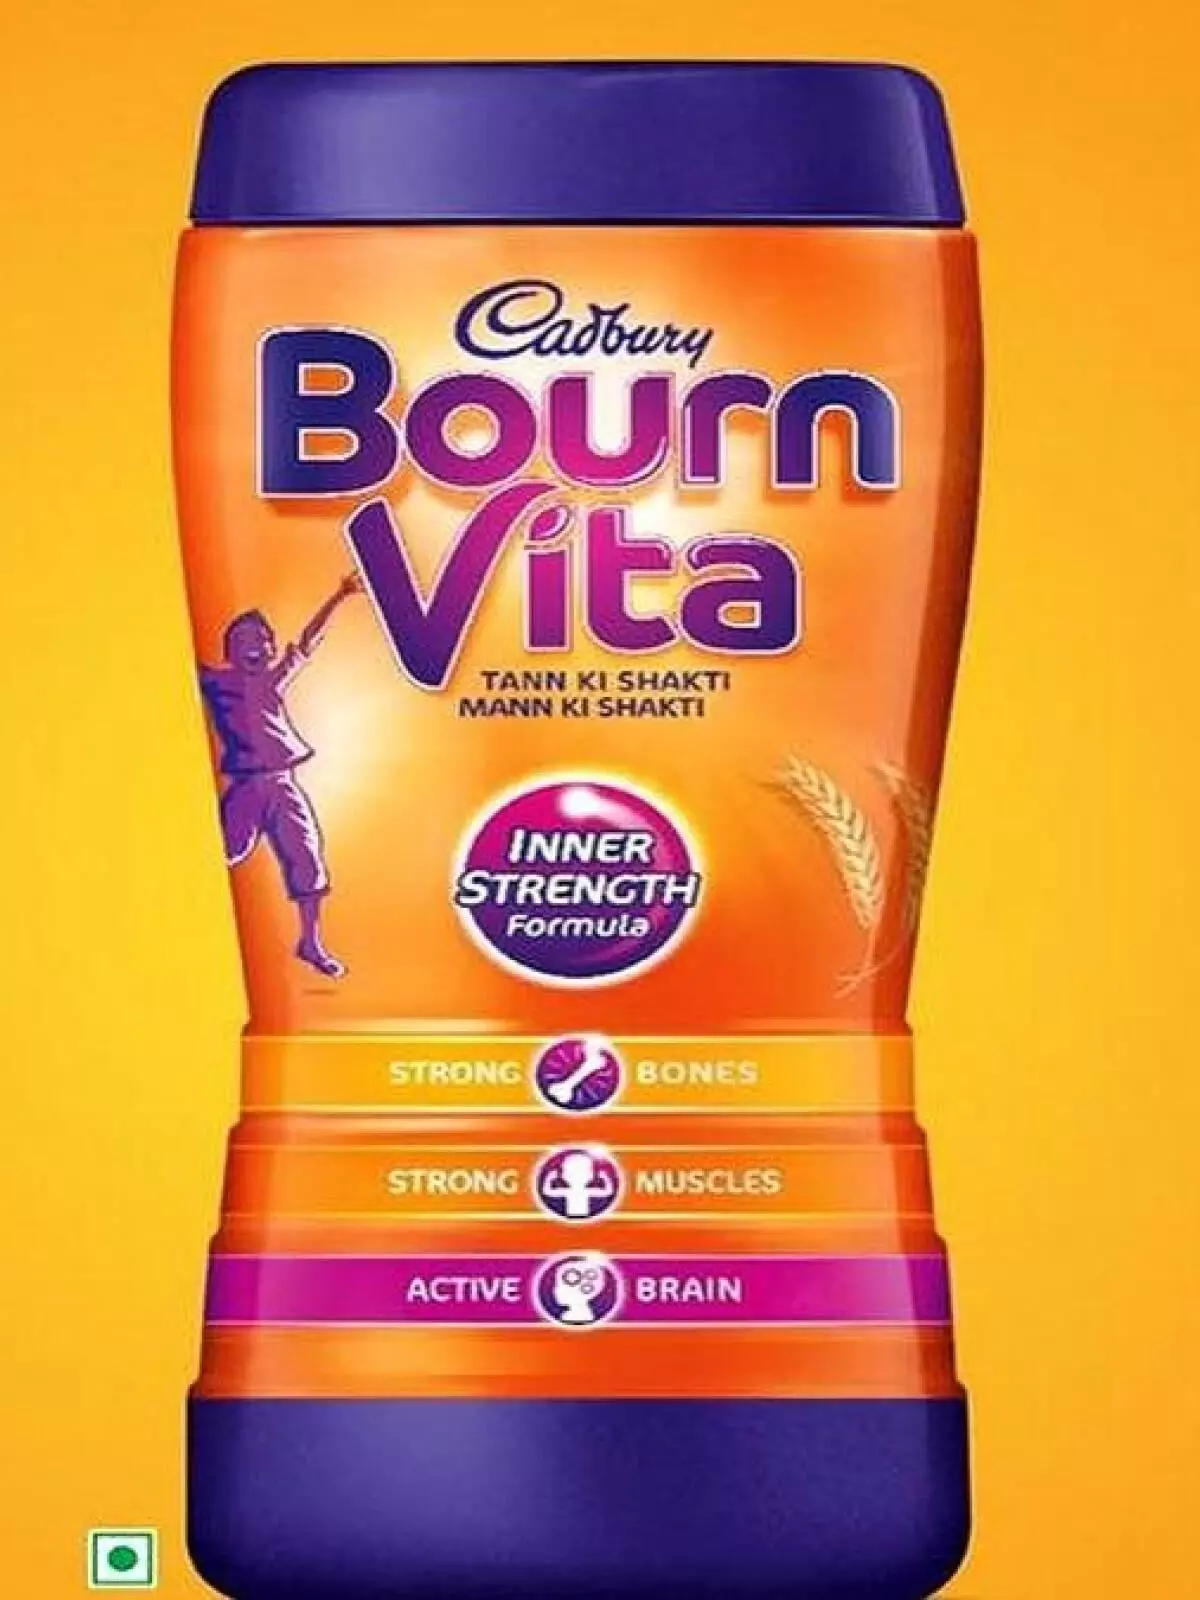 Bournvita not a health drink, government gives instructions to e-commerce companies to remove it from health category